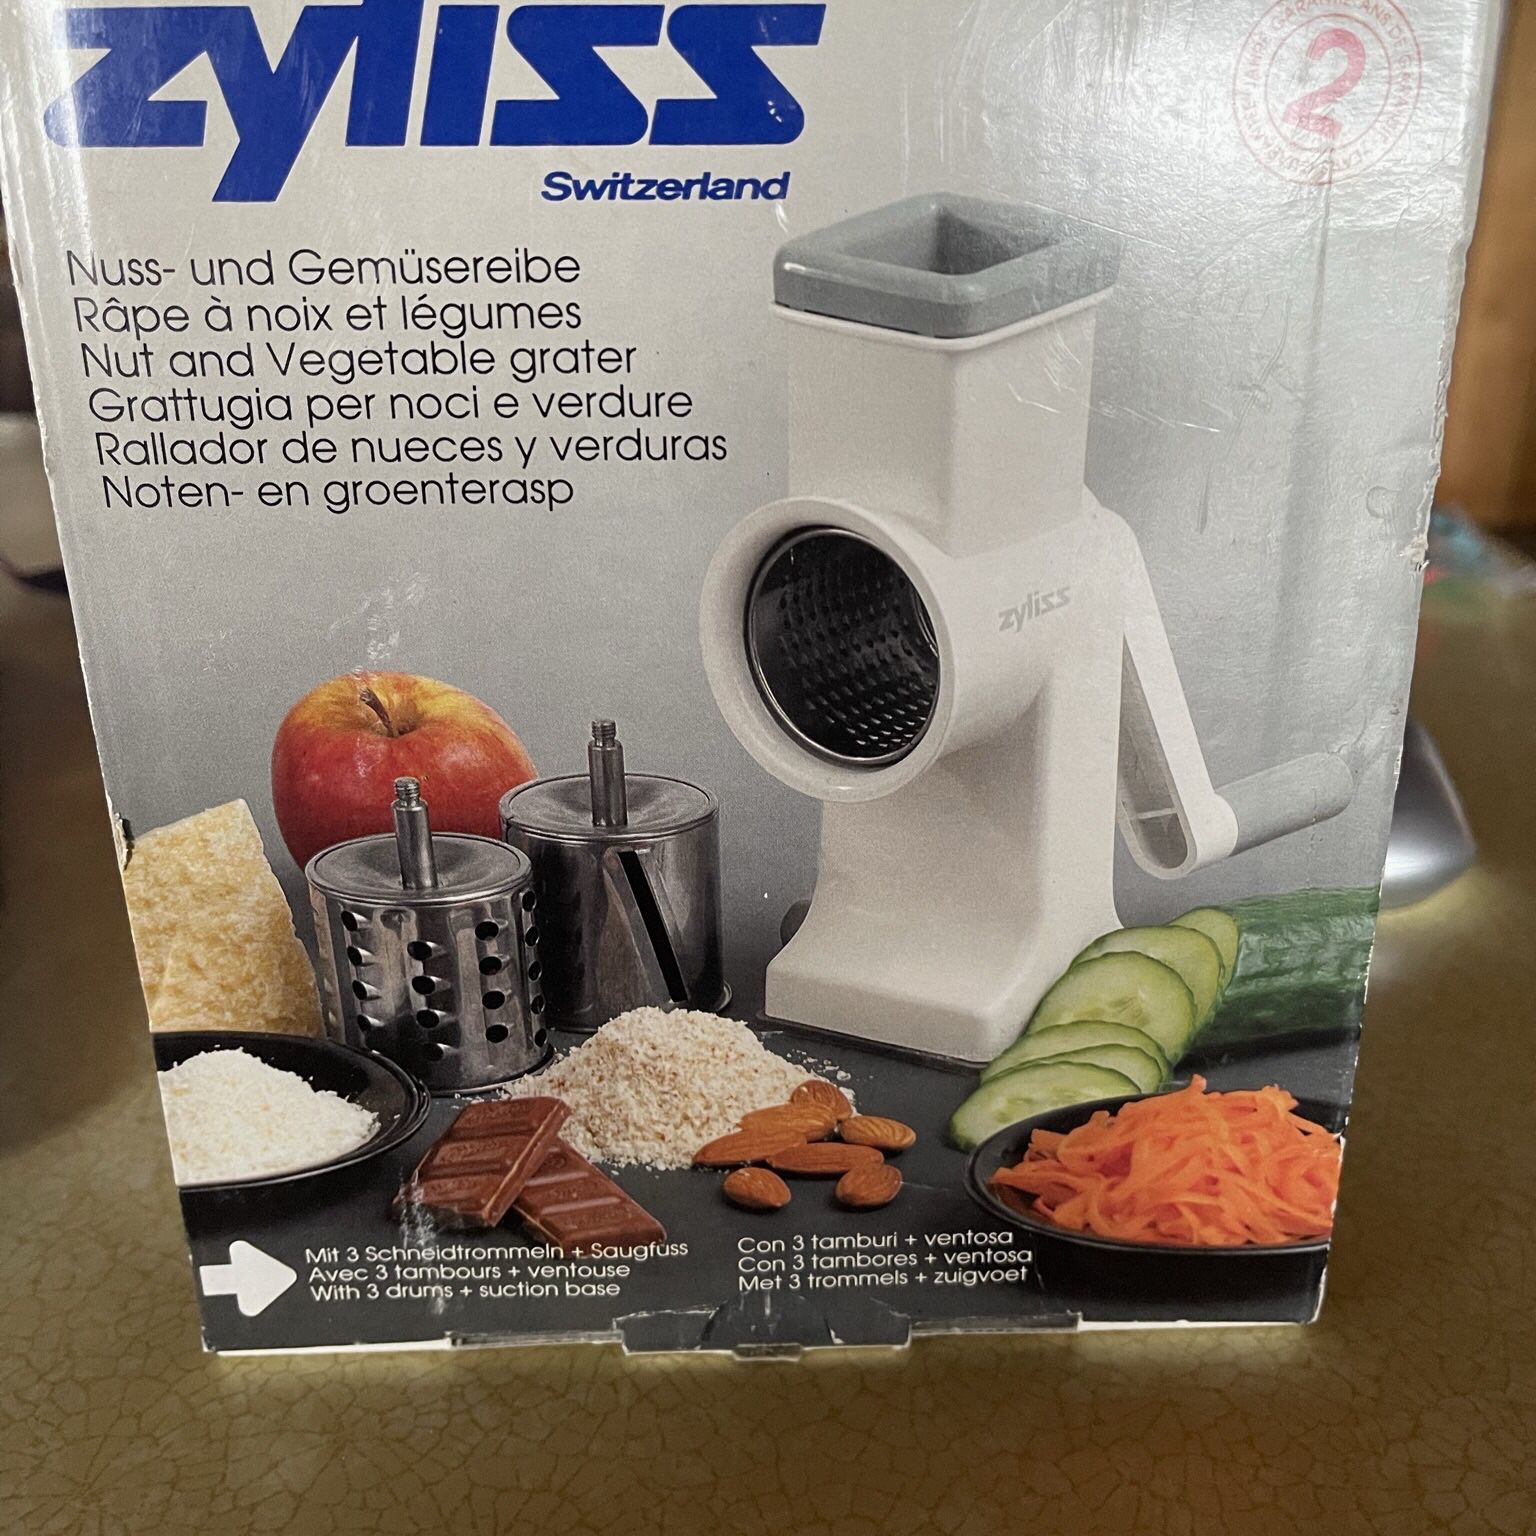 New ZYLISS Pampered Chef Switzerland Rotary Cheese Grater - Never Used